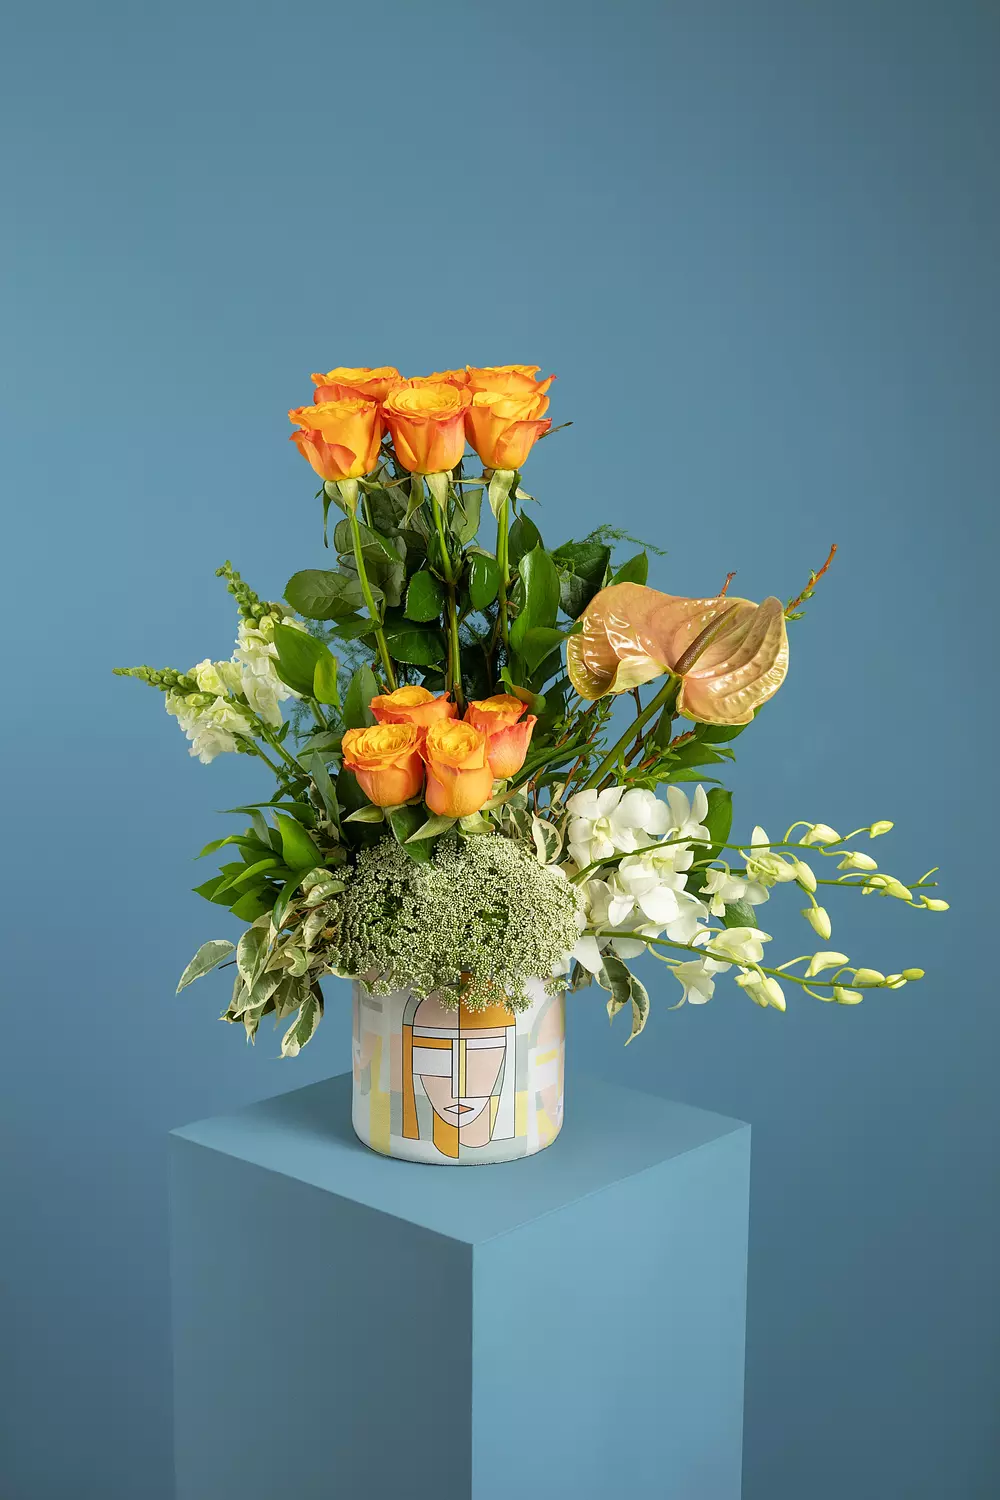 Exceptional Person Flower Vase hover image